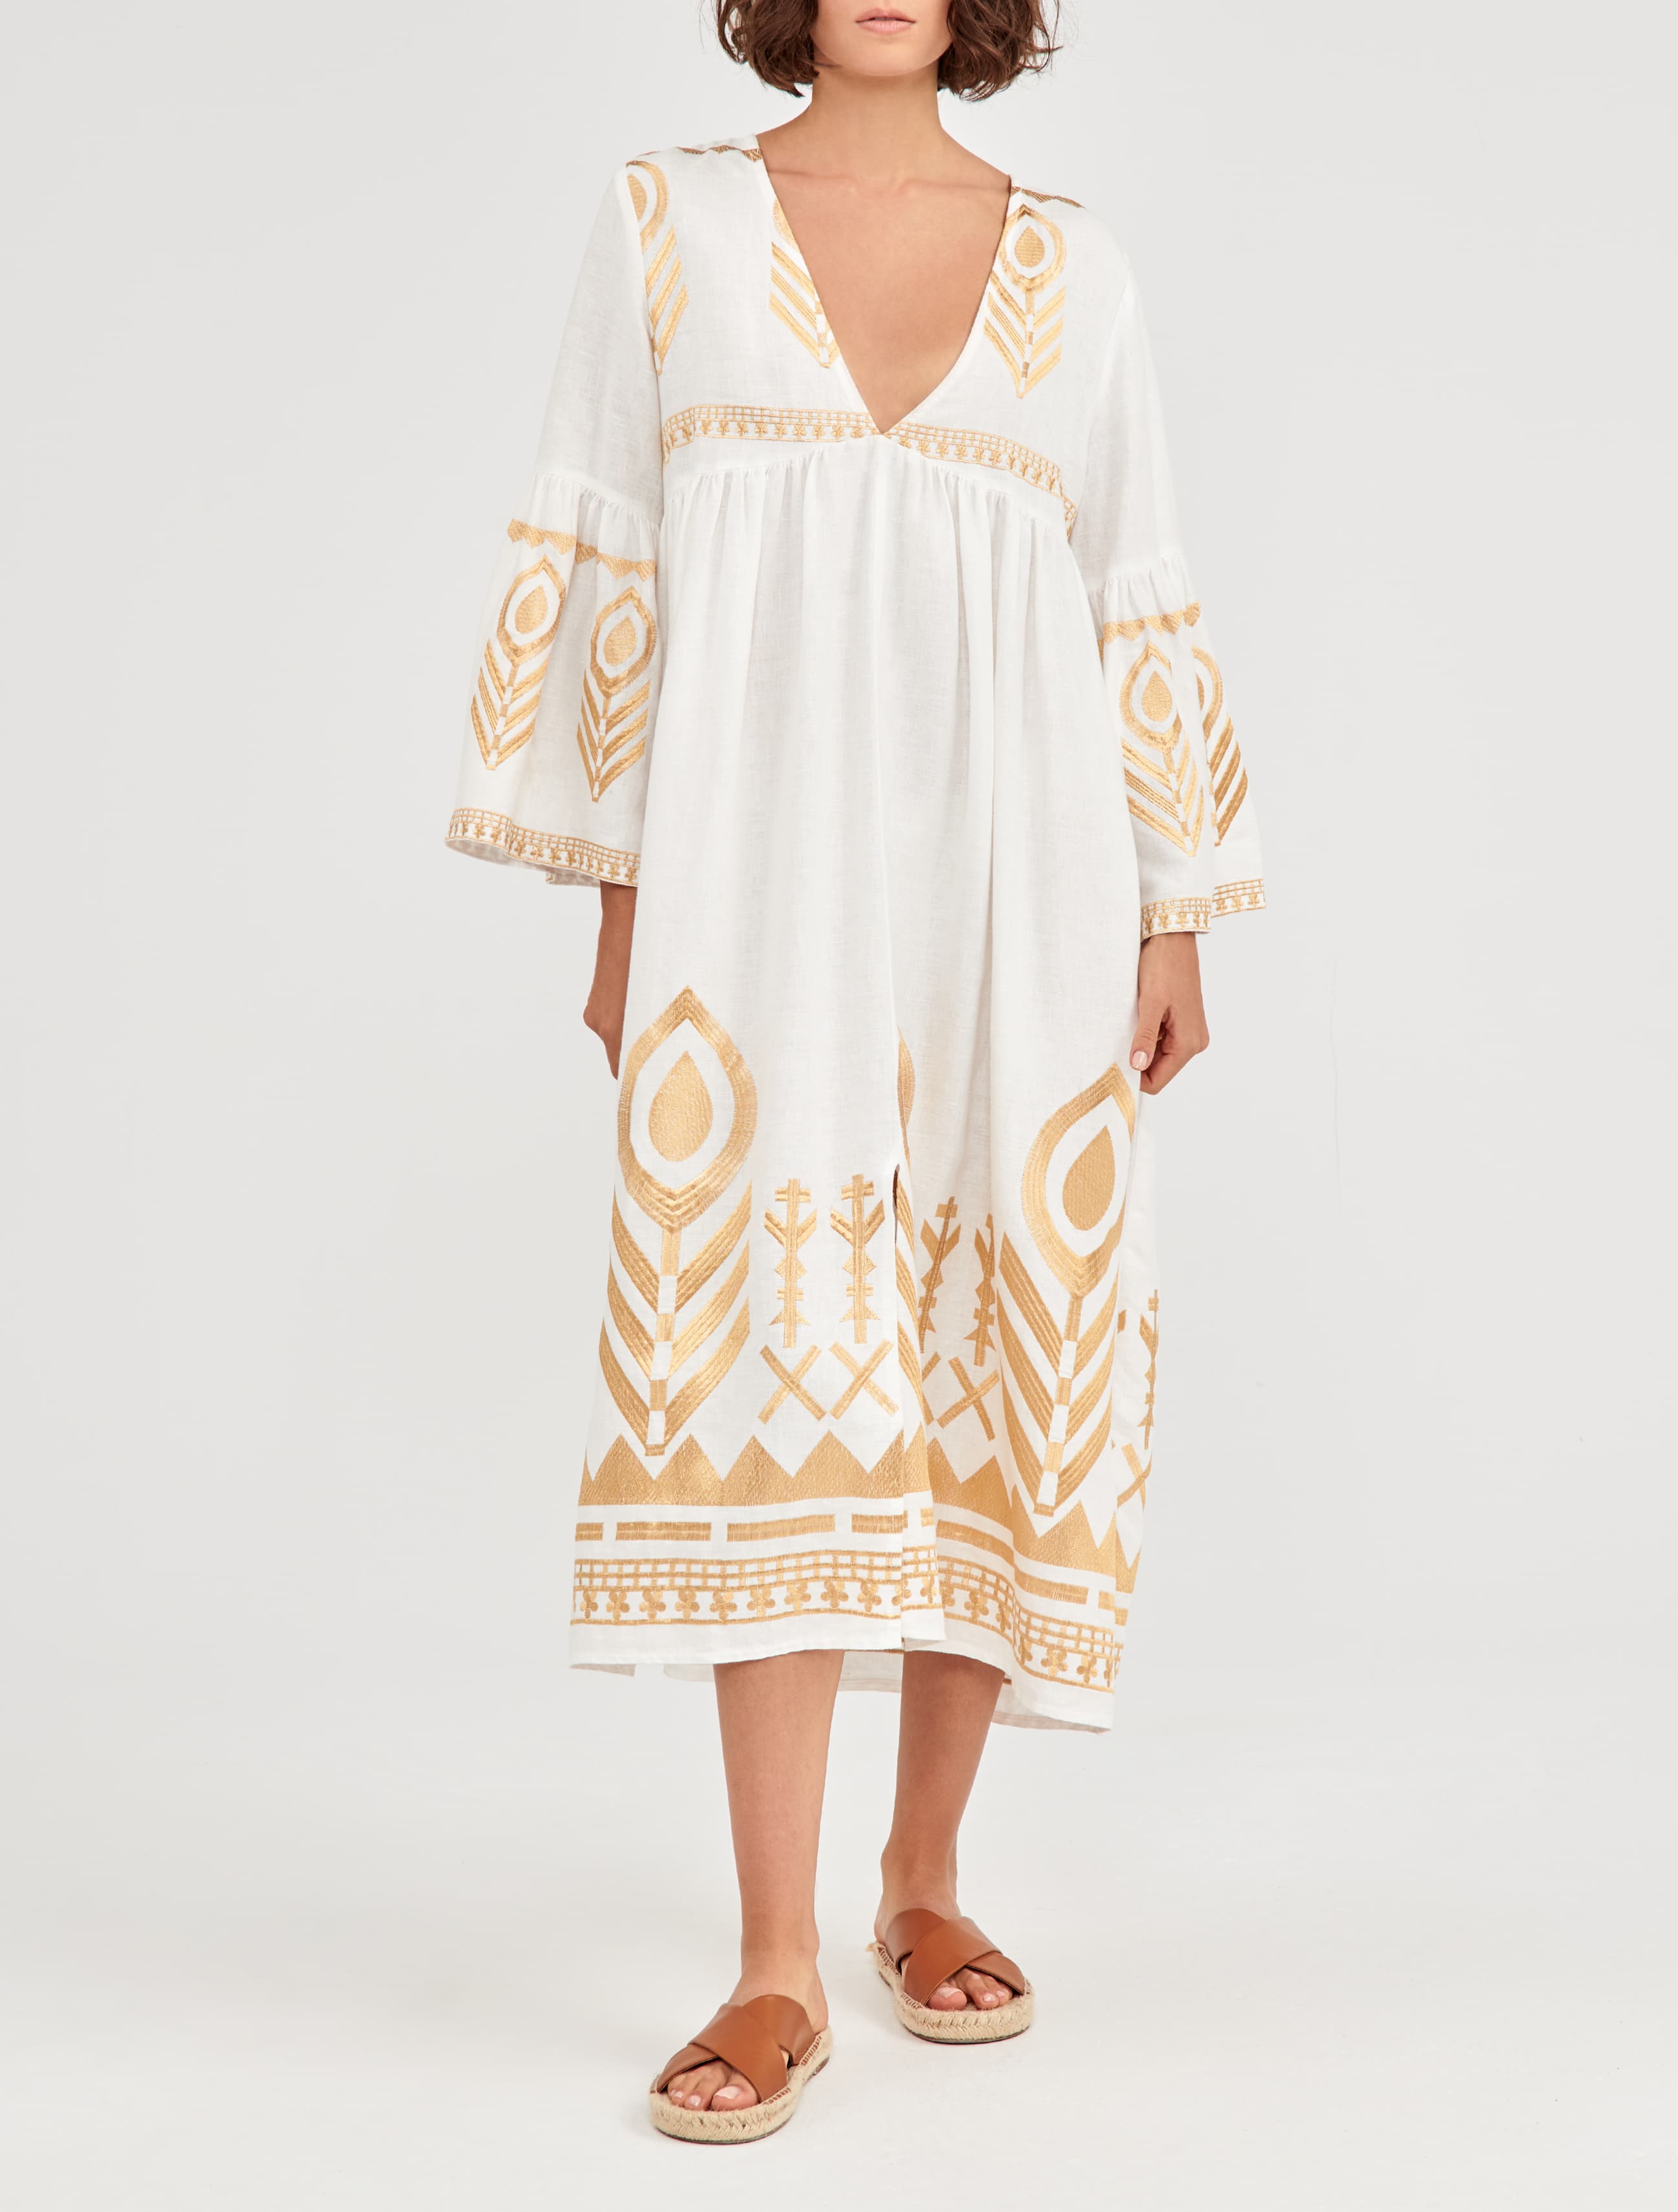 Chic at Every Age, J Jill White Embroidered Dress